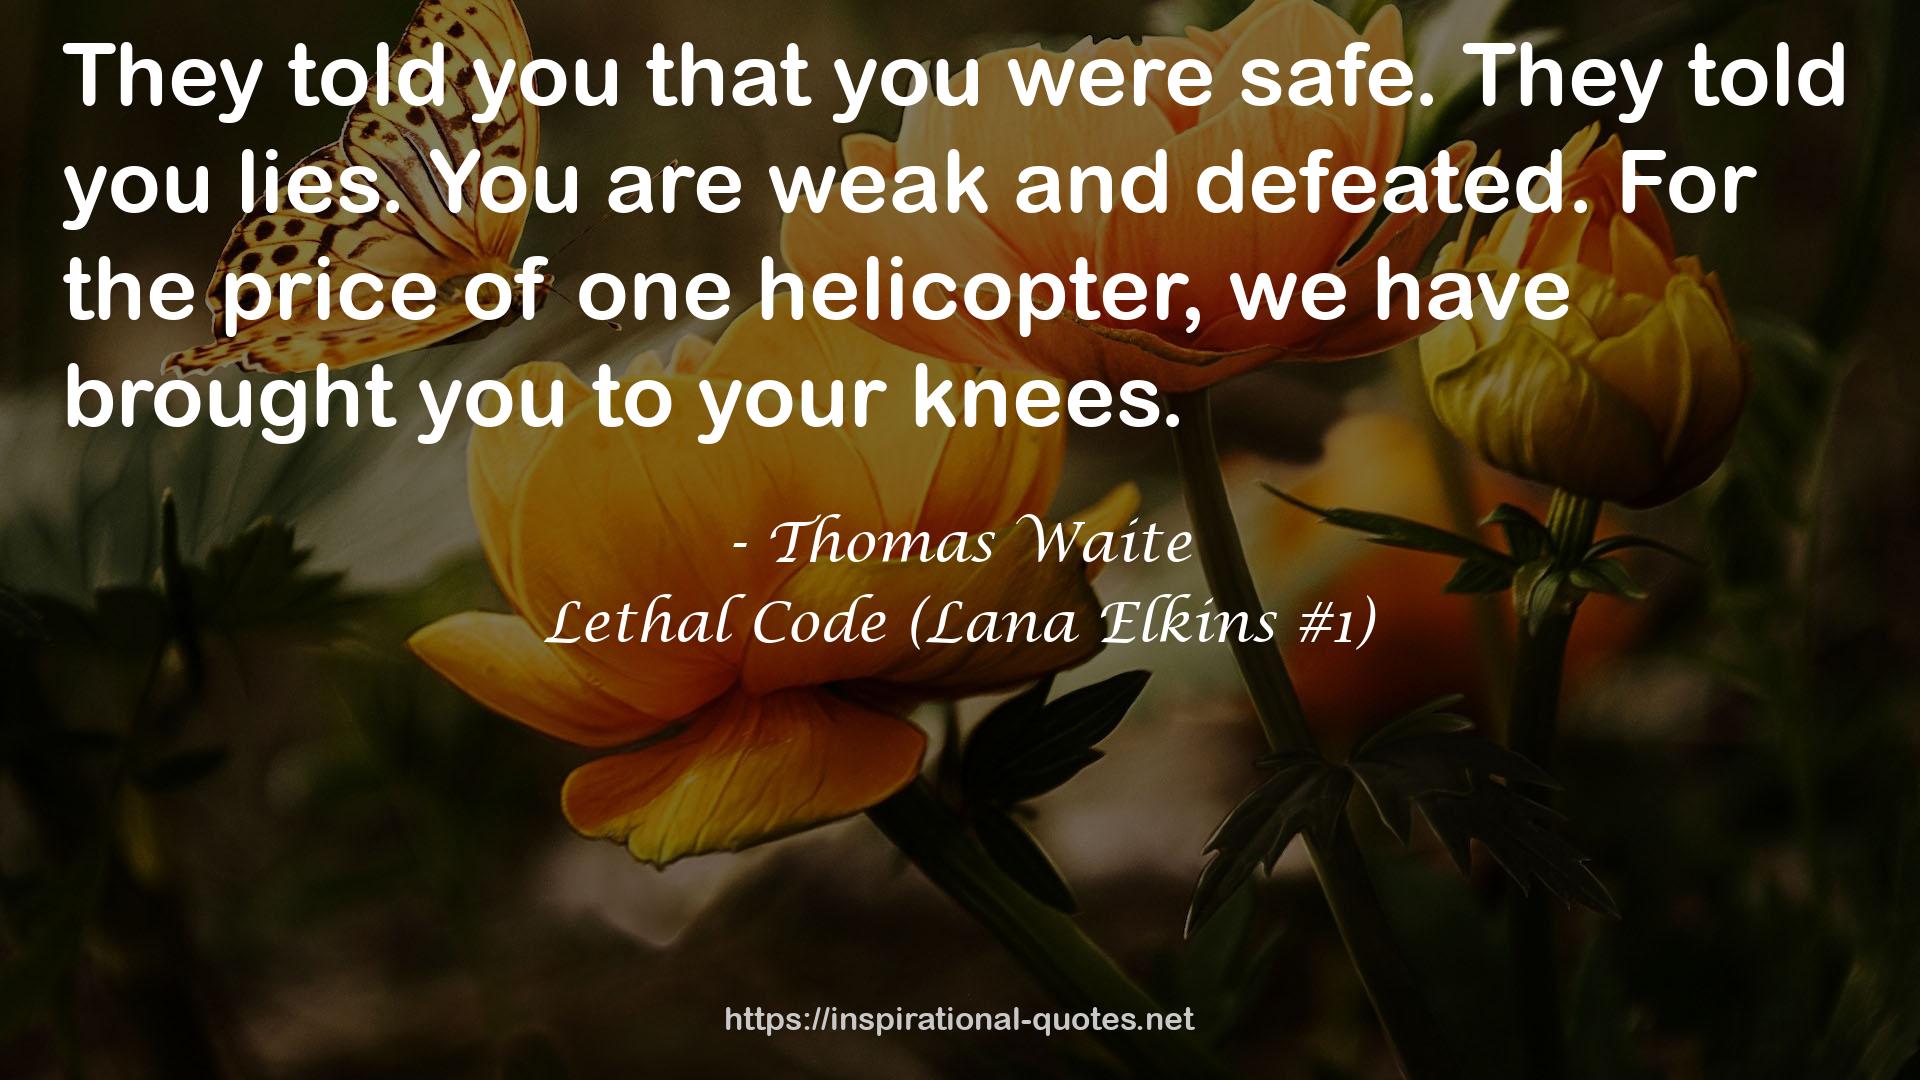 Lethal Code (Lana Elkins #1) QUOTES